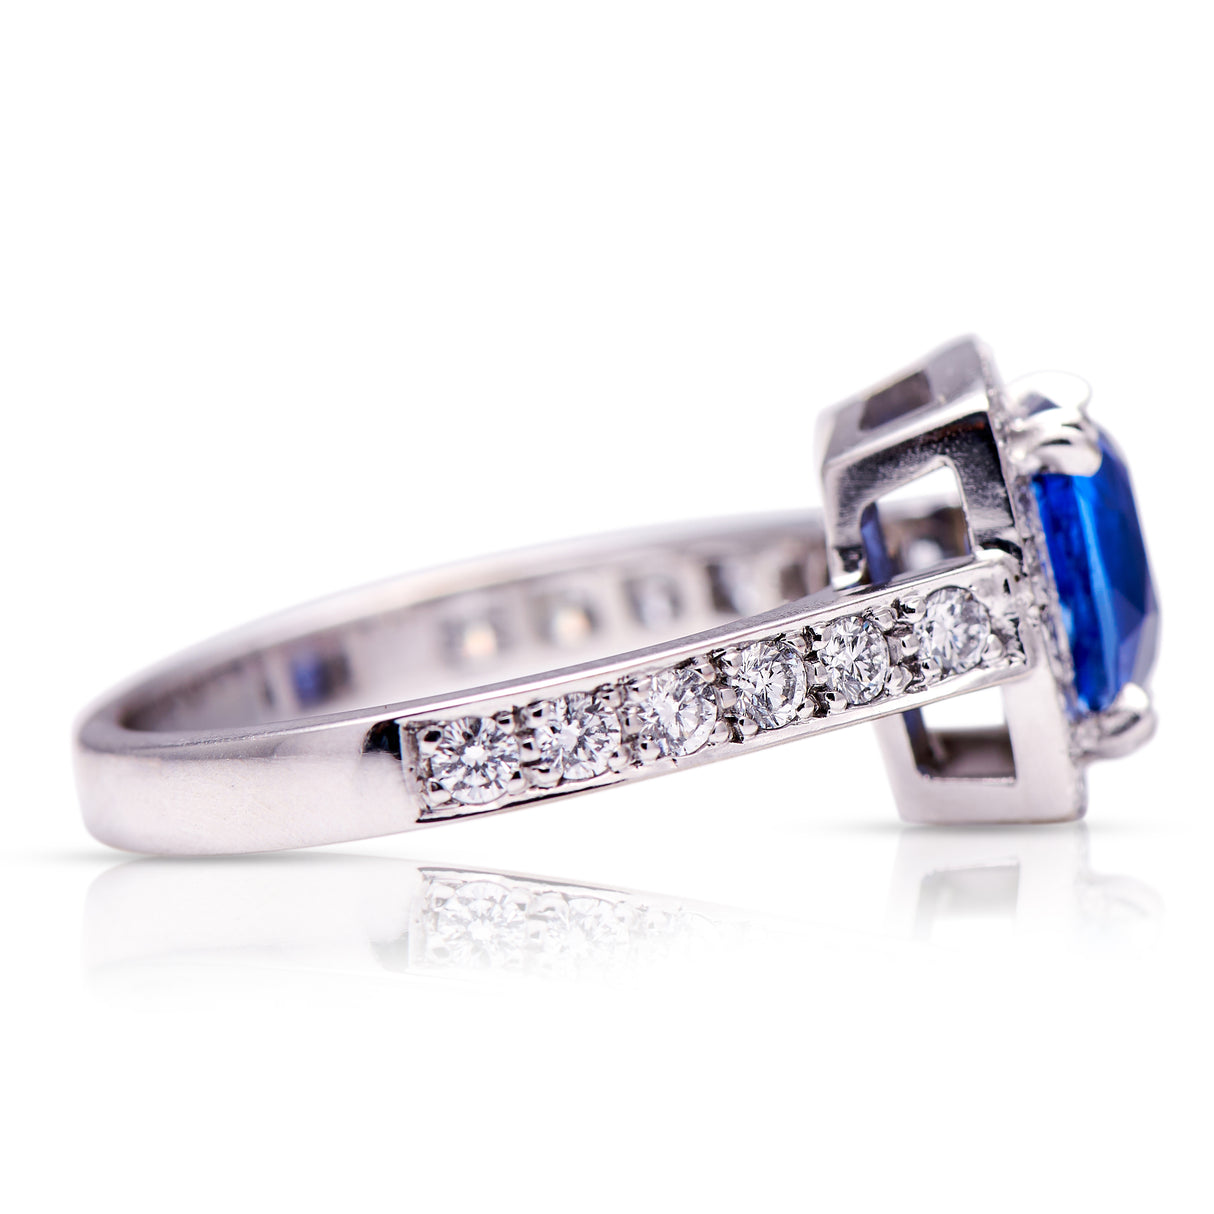 Engagement | 18ct White Gold, Sapphire and Diamond Ring